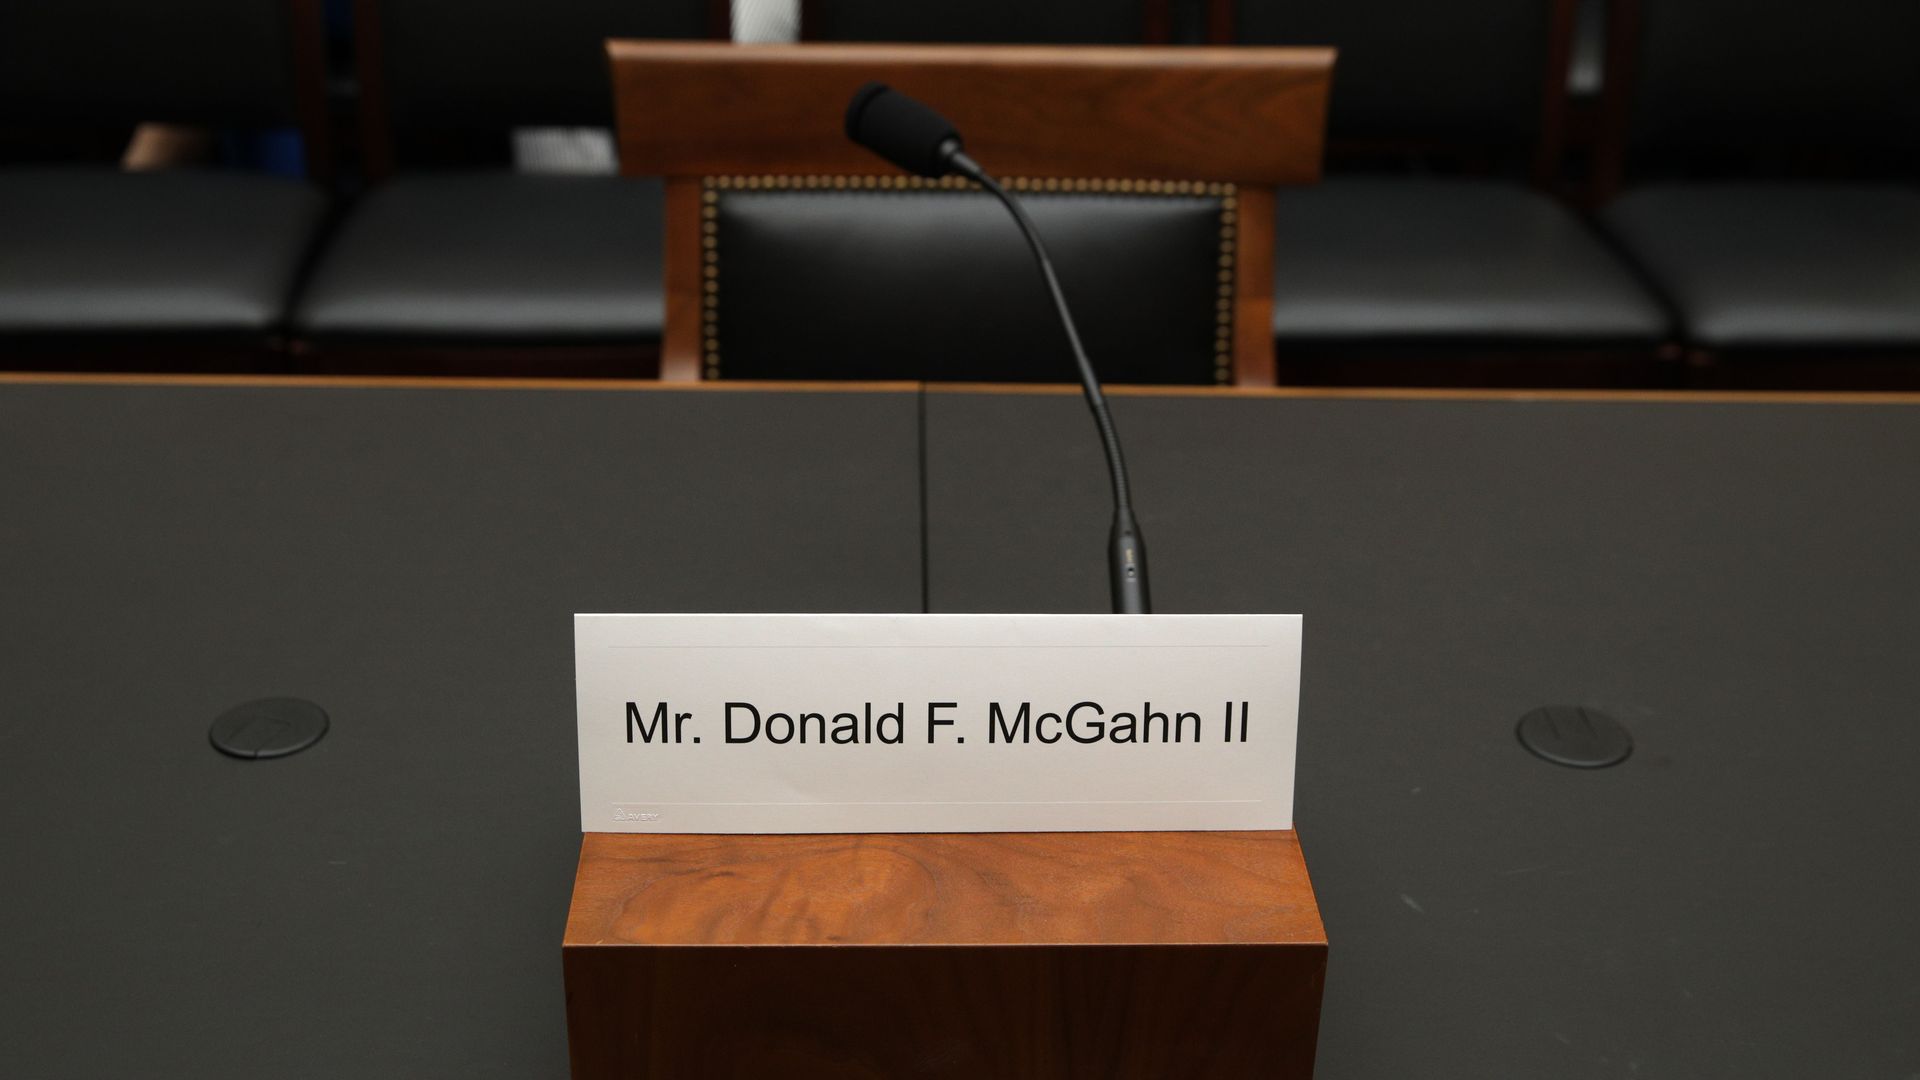 This image shows a placard for McGahn in front of an empty seat.